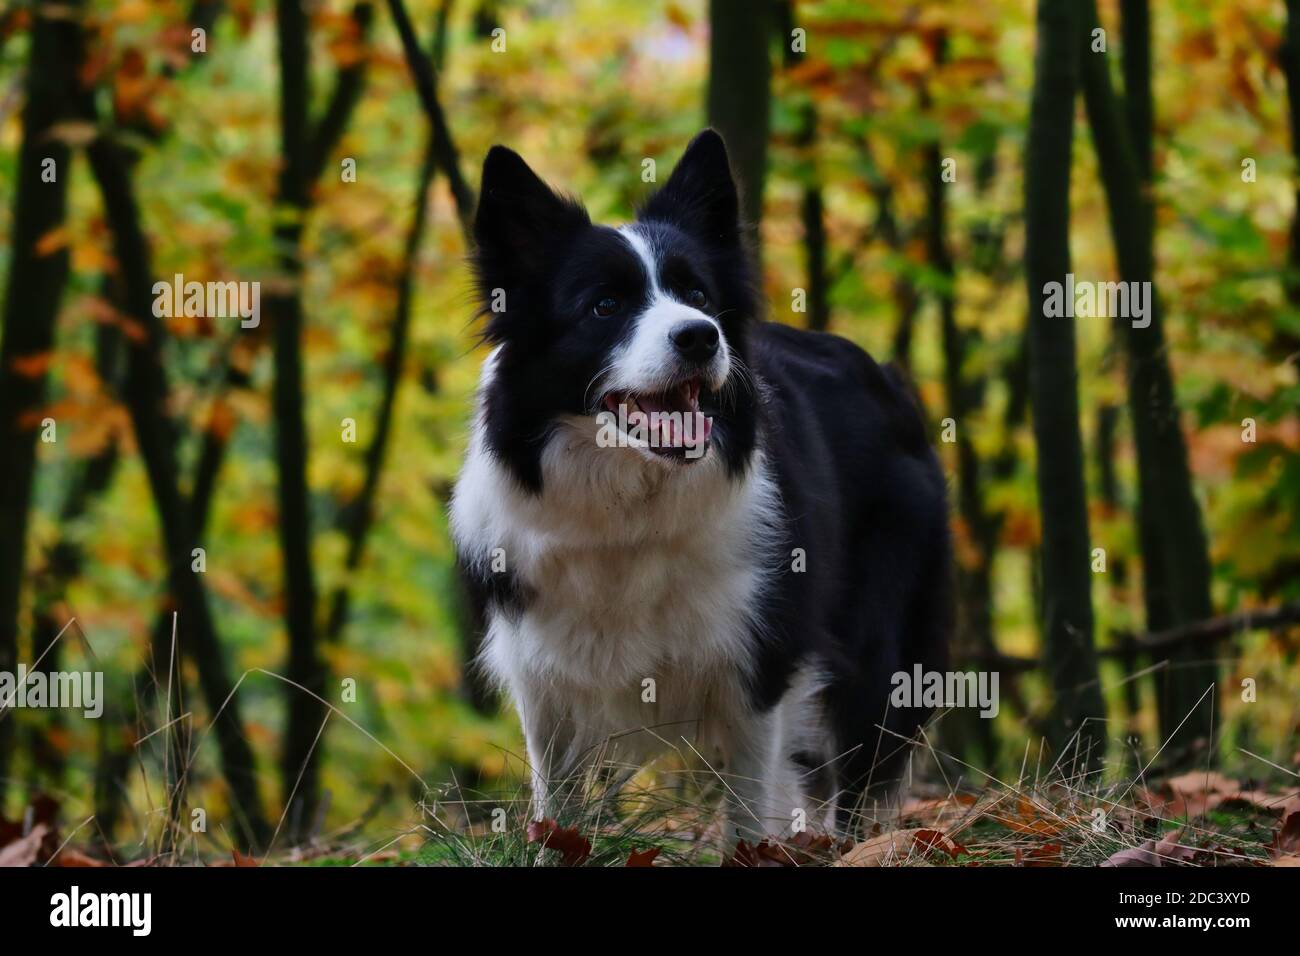 Cute Border Collie Stands in Colorful Forest during Fall Season. Autumn Mood with Happy Black and White Dog Smiling in Nature. Stock Photo